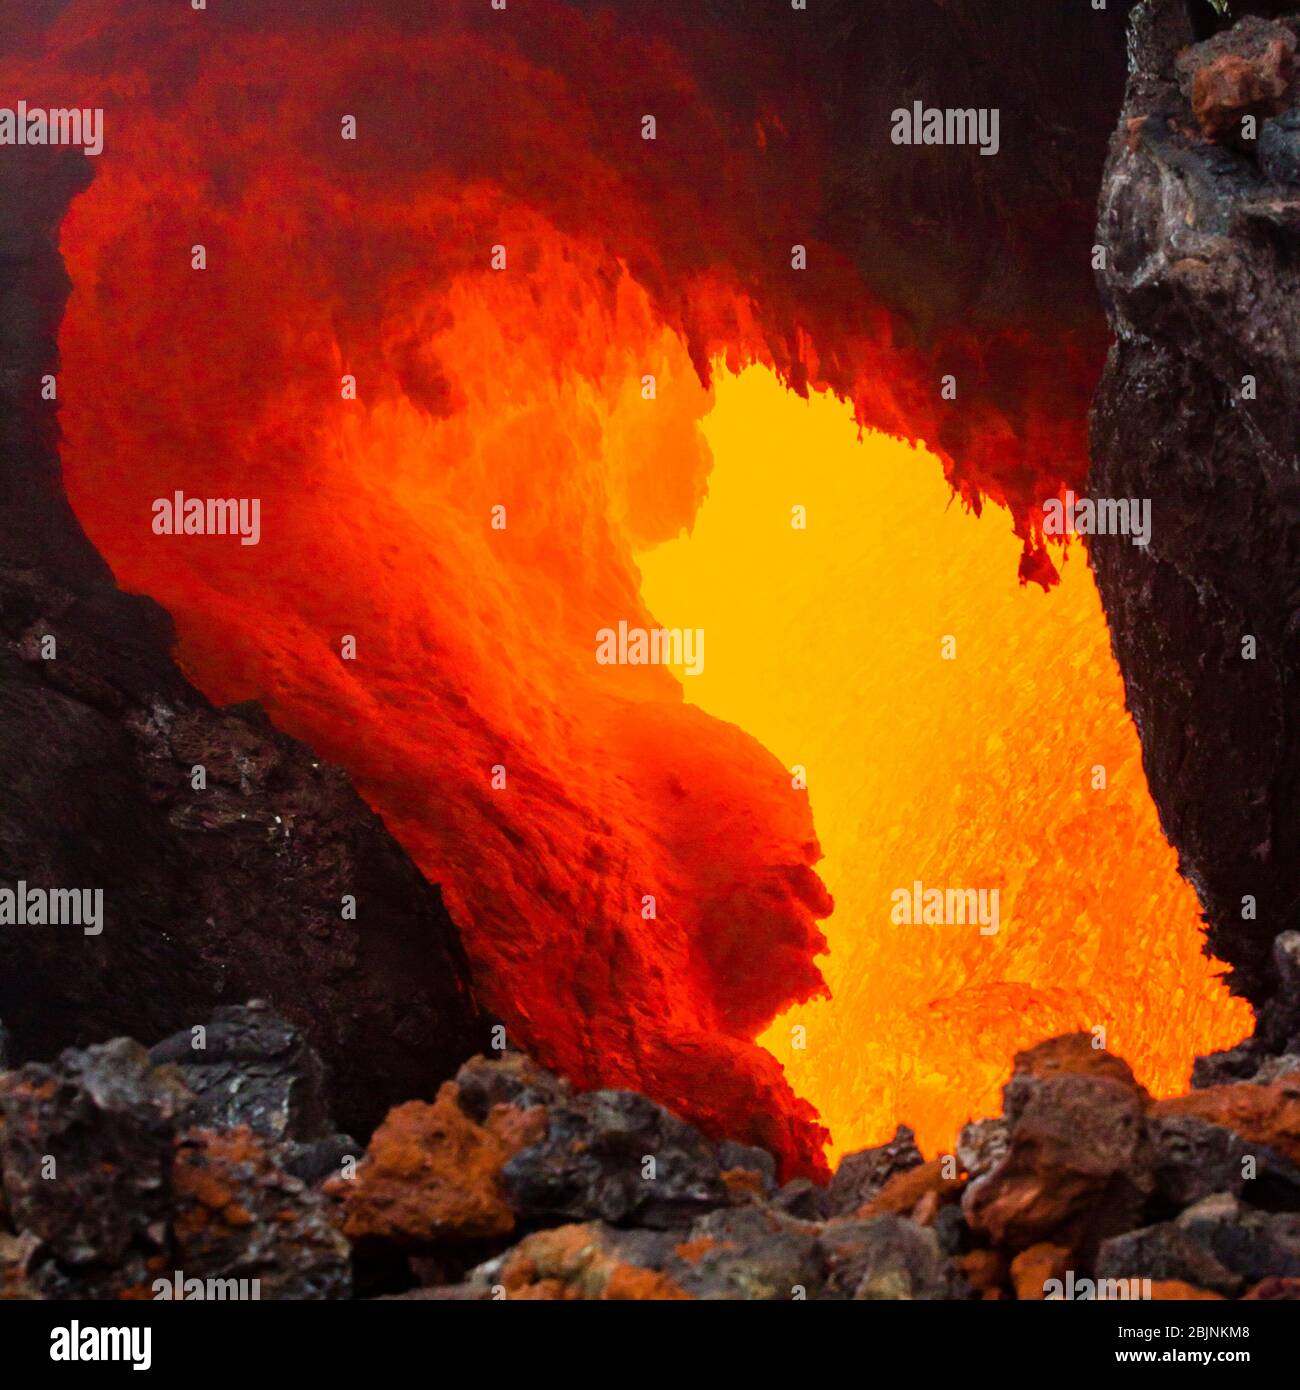 Eruption of Volcano Tolbachik, boiling magma flowing through lava tubes  under the layer of solid lava, Kamchatka Peninsula, Russia Stock Photo -  Alamy